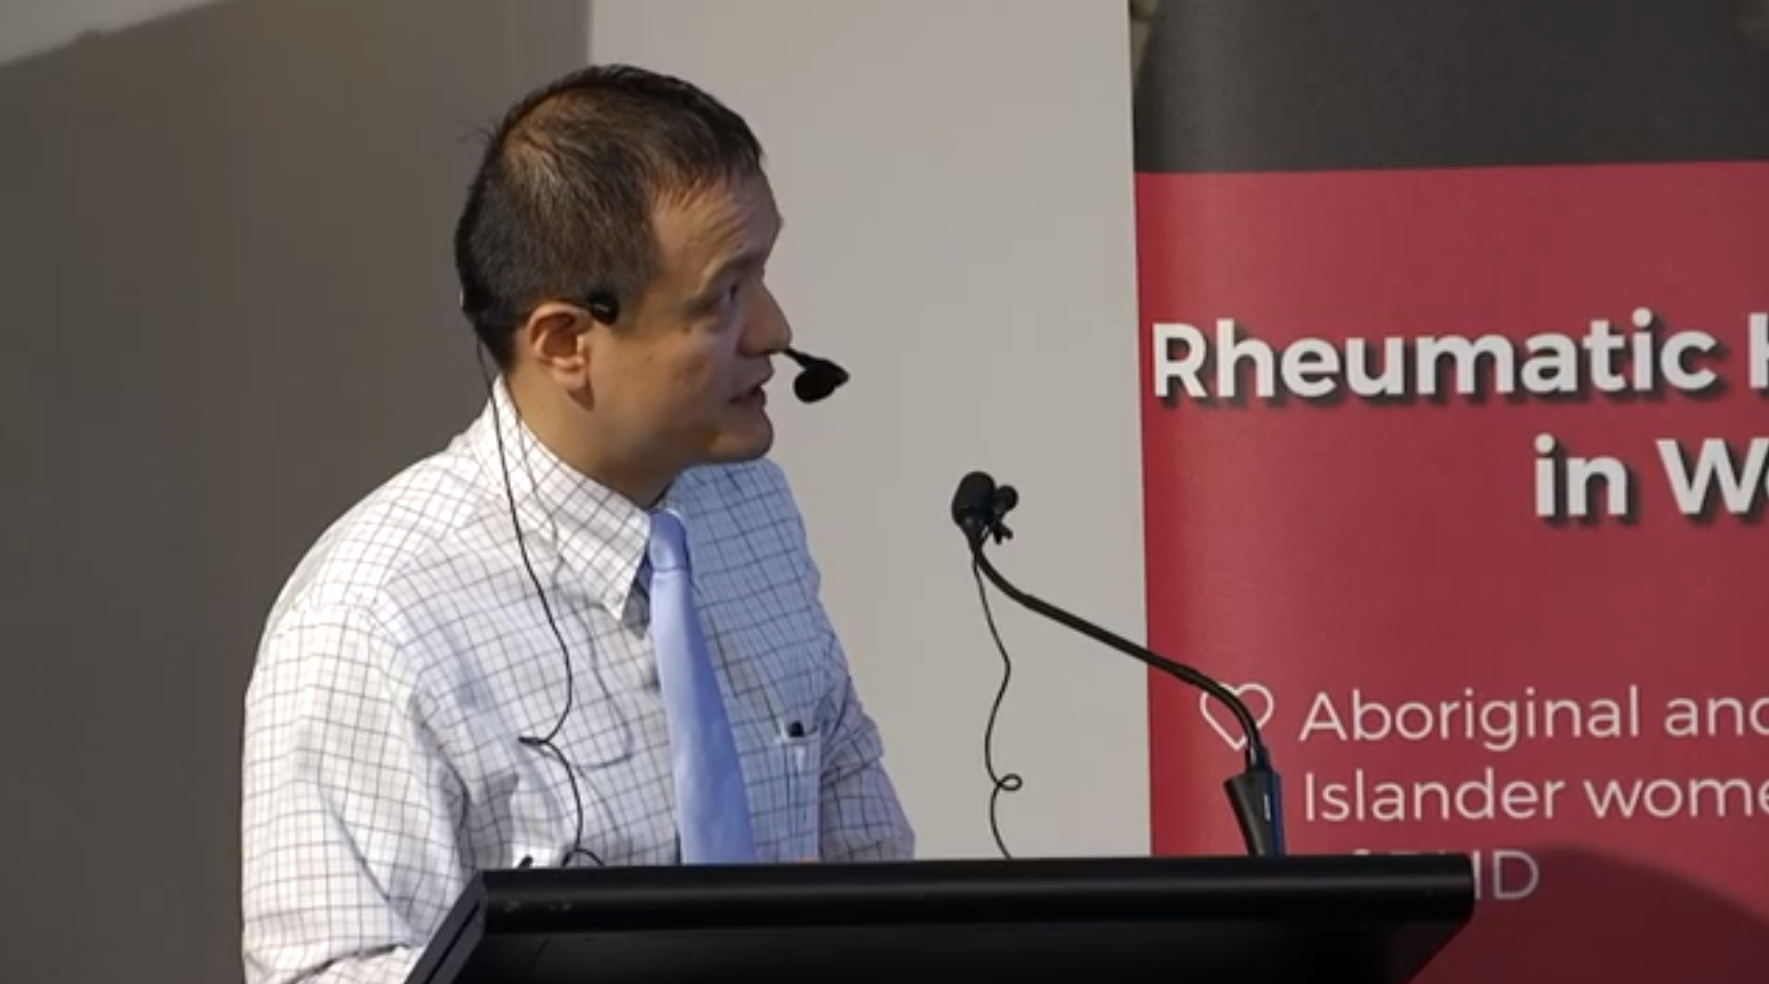 How to determine the people who require primary and secondary prevention of acute rheumatic fever in the primary care setting. He also discusses appropriate strategies to improve/maximise delivery of secondary prophylaxis in the practice.